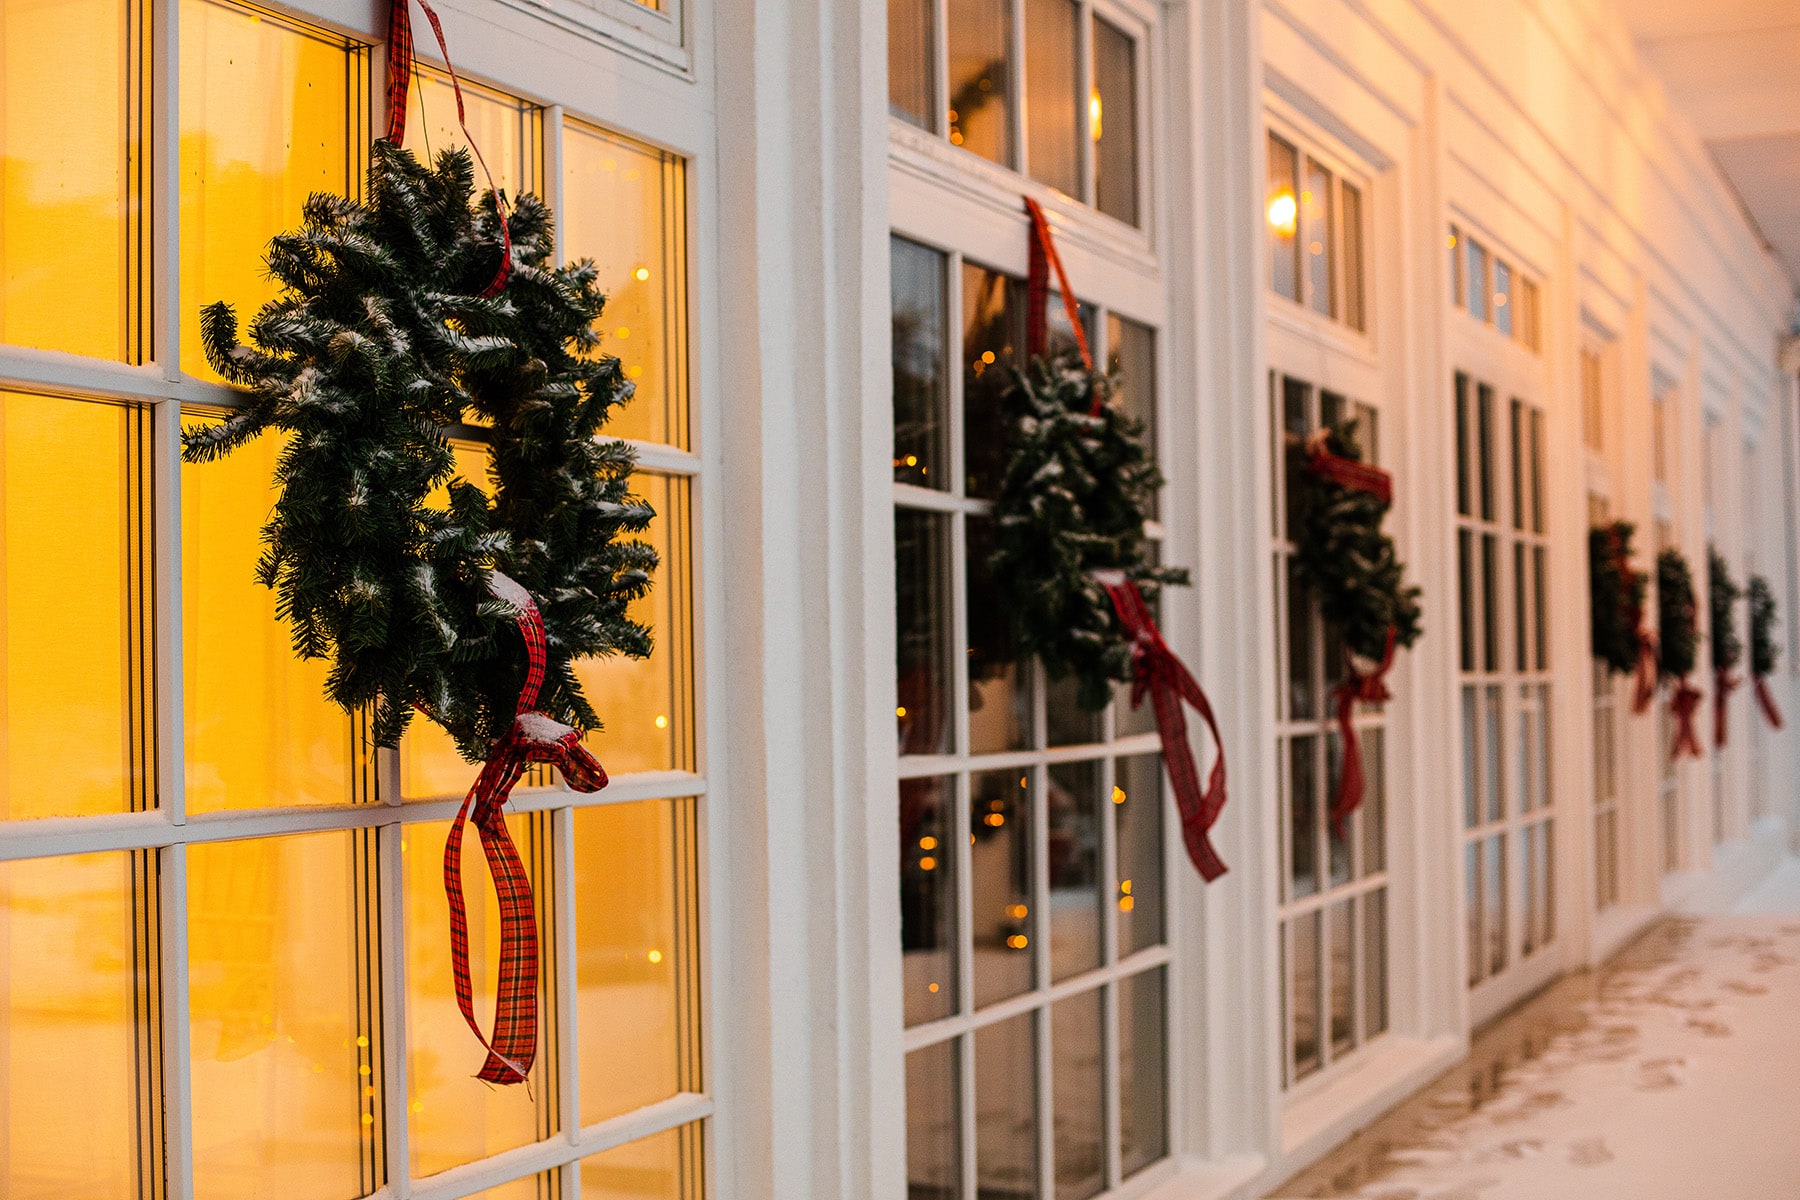 Beautiful Wreaths on French Doors